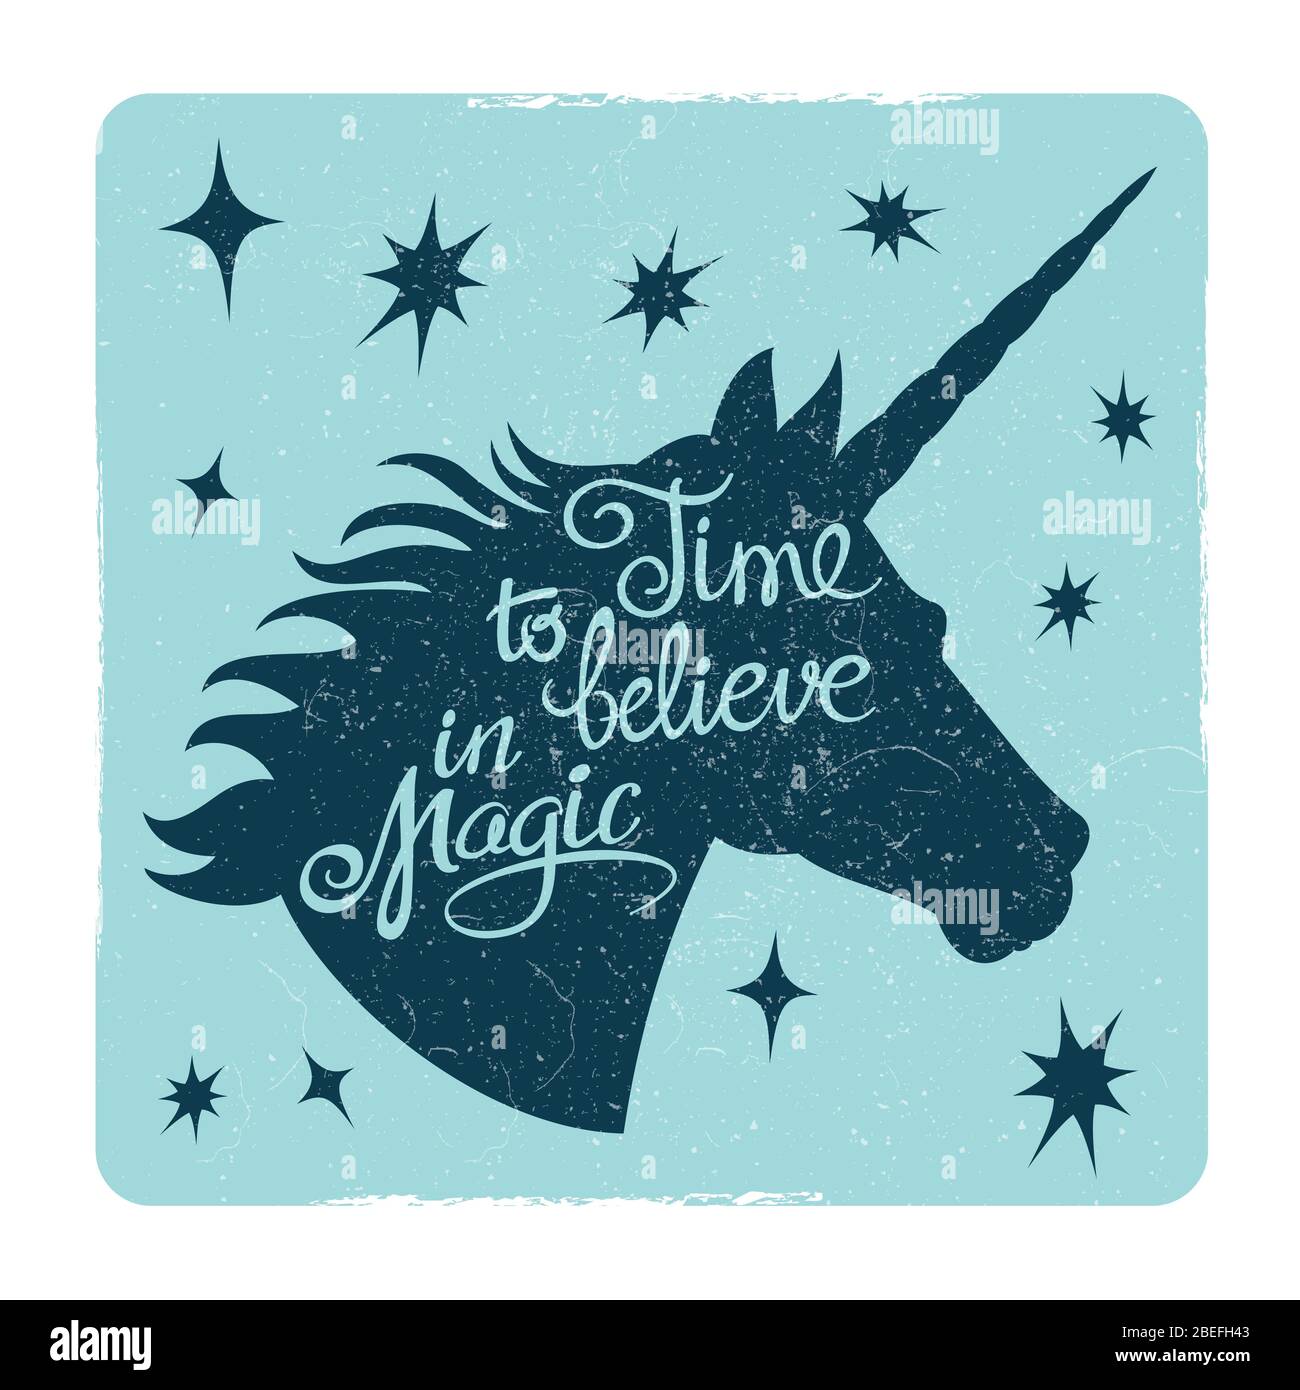 Grunge vintage card with inspiring unicorn silhouette head. Vector illustration Stock Vector